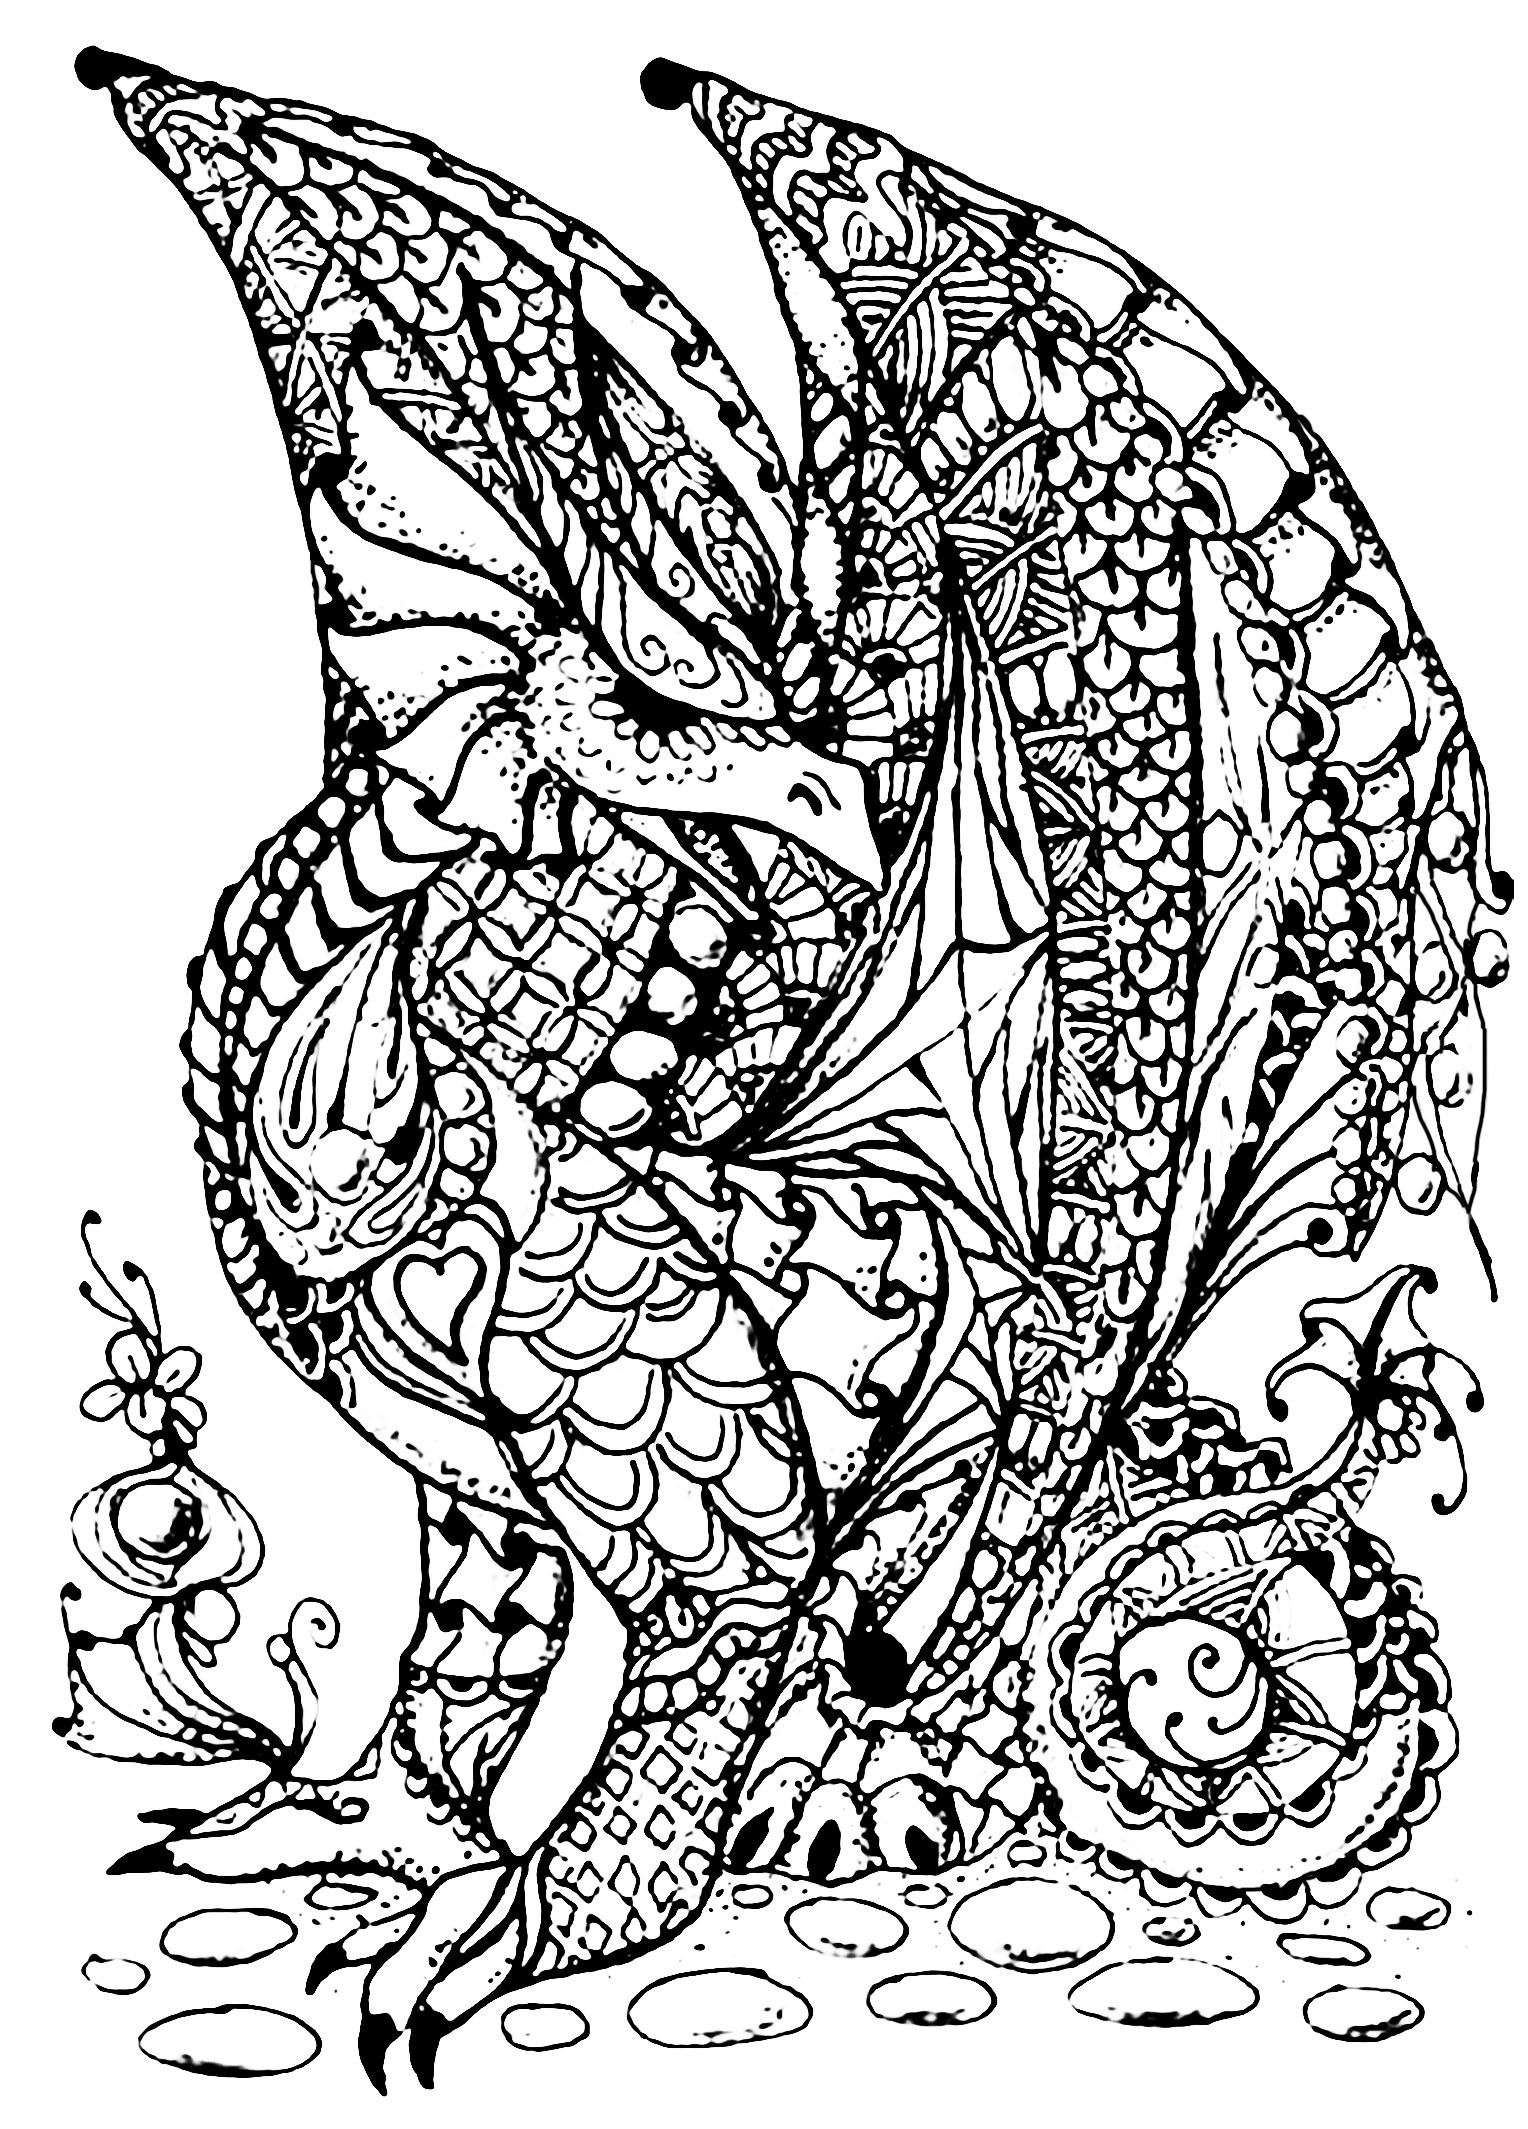 Adult Coloring Book Dragon
 Dragon full of scales Dragons Adult Coloring Pages